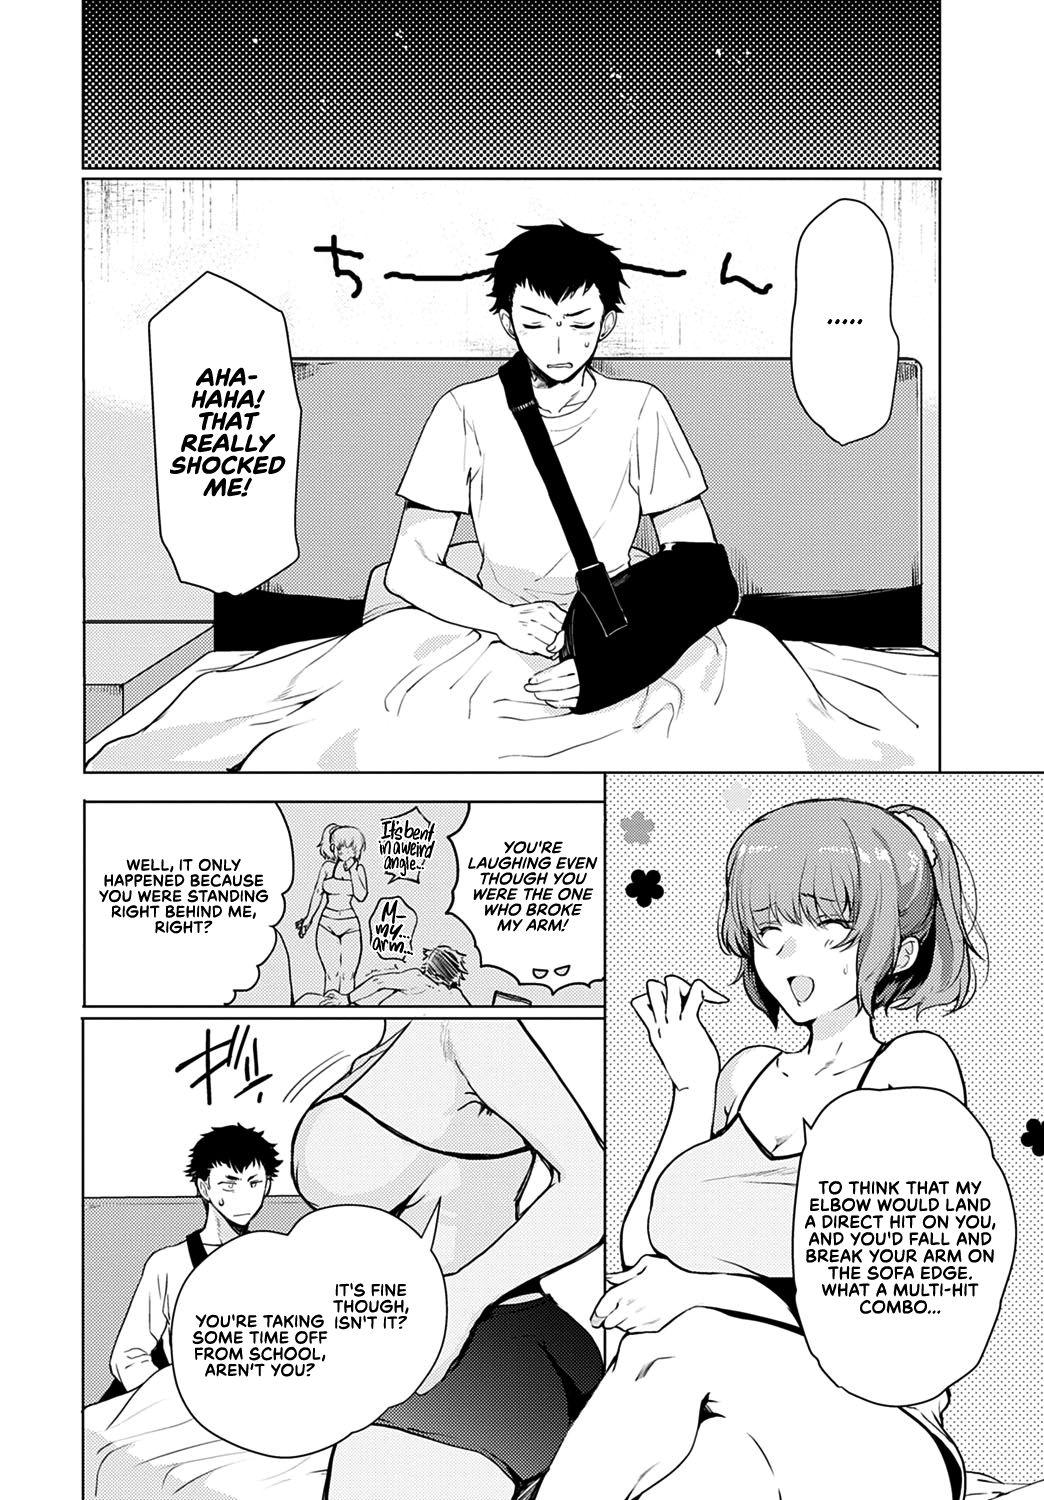 Gang Kyoudai Switch | Siblings Switch Students - Page 4